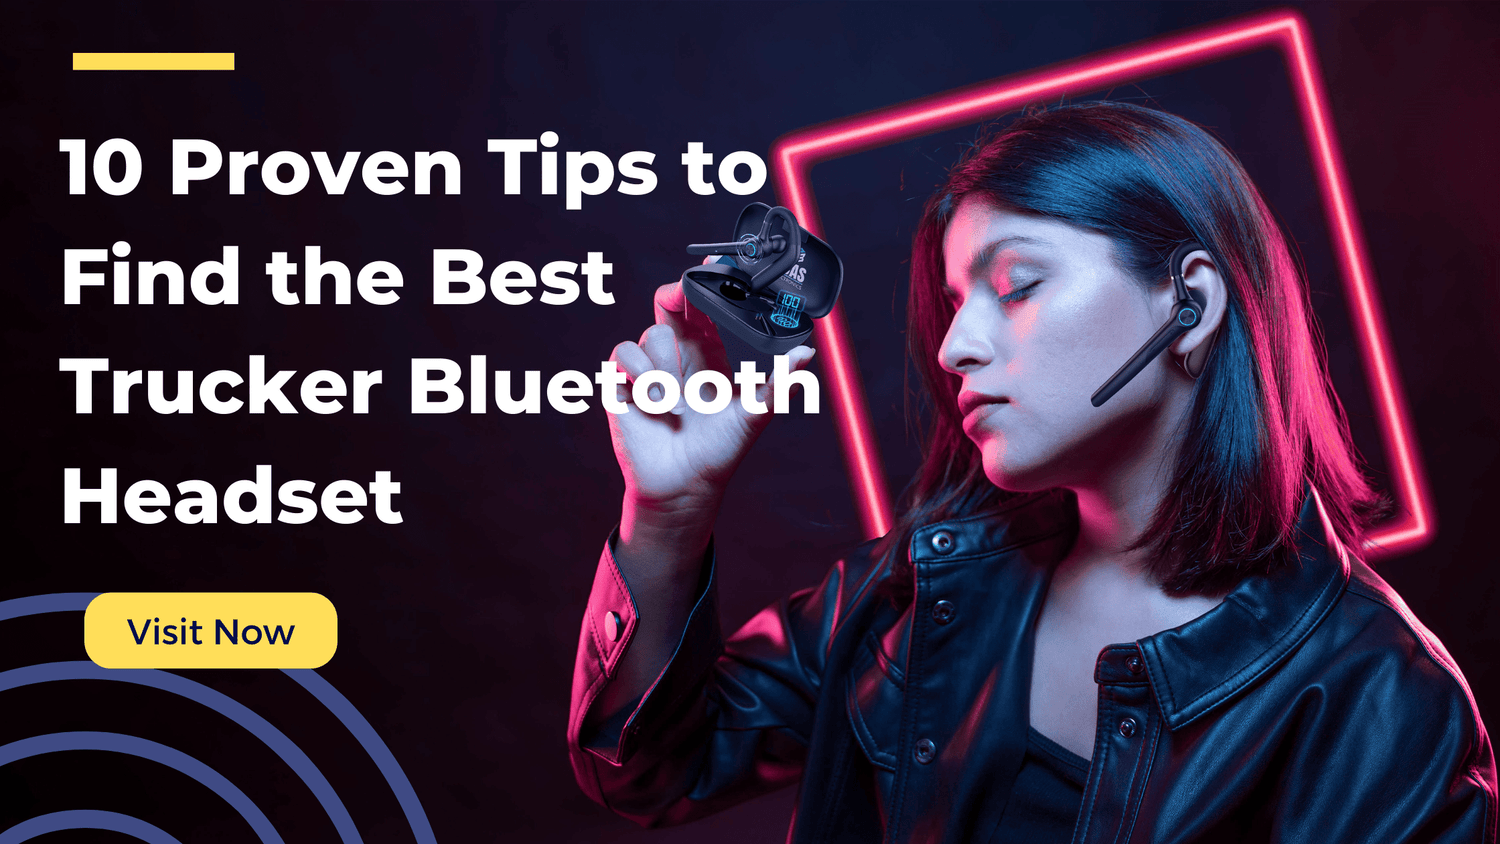 10 Proven Tips to Find the Best Trucker Bluetooth Headset - LDAS ELECTRONICS